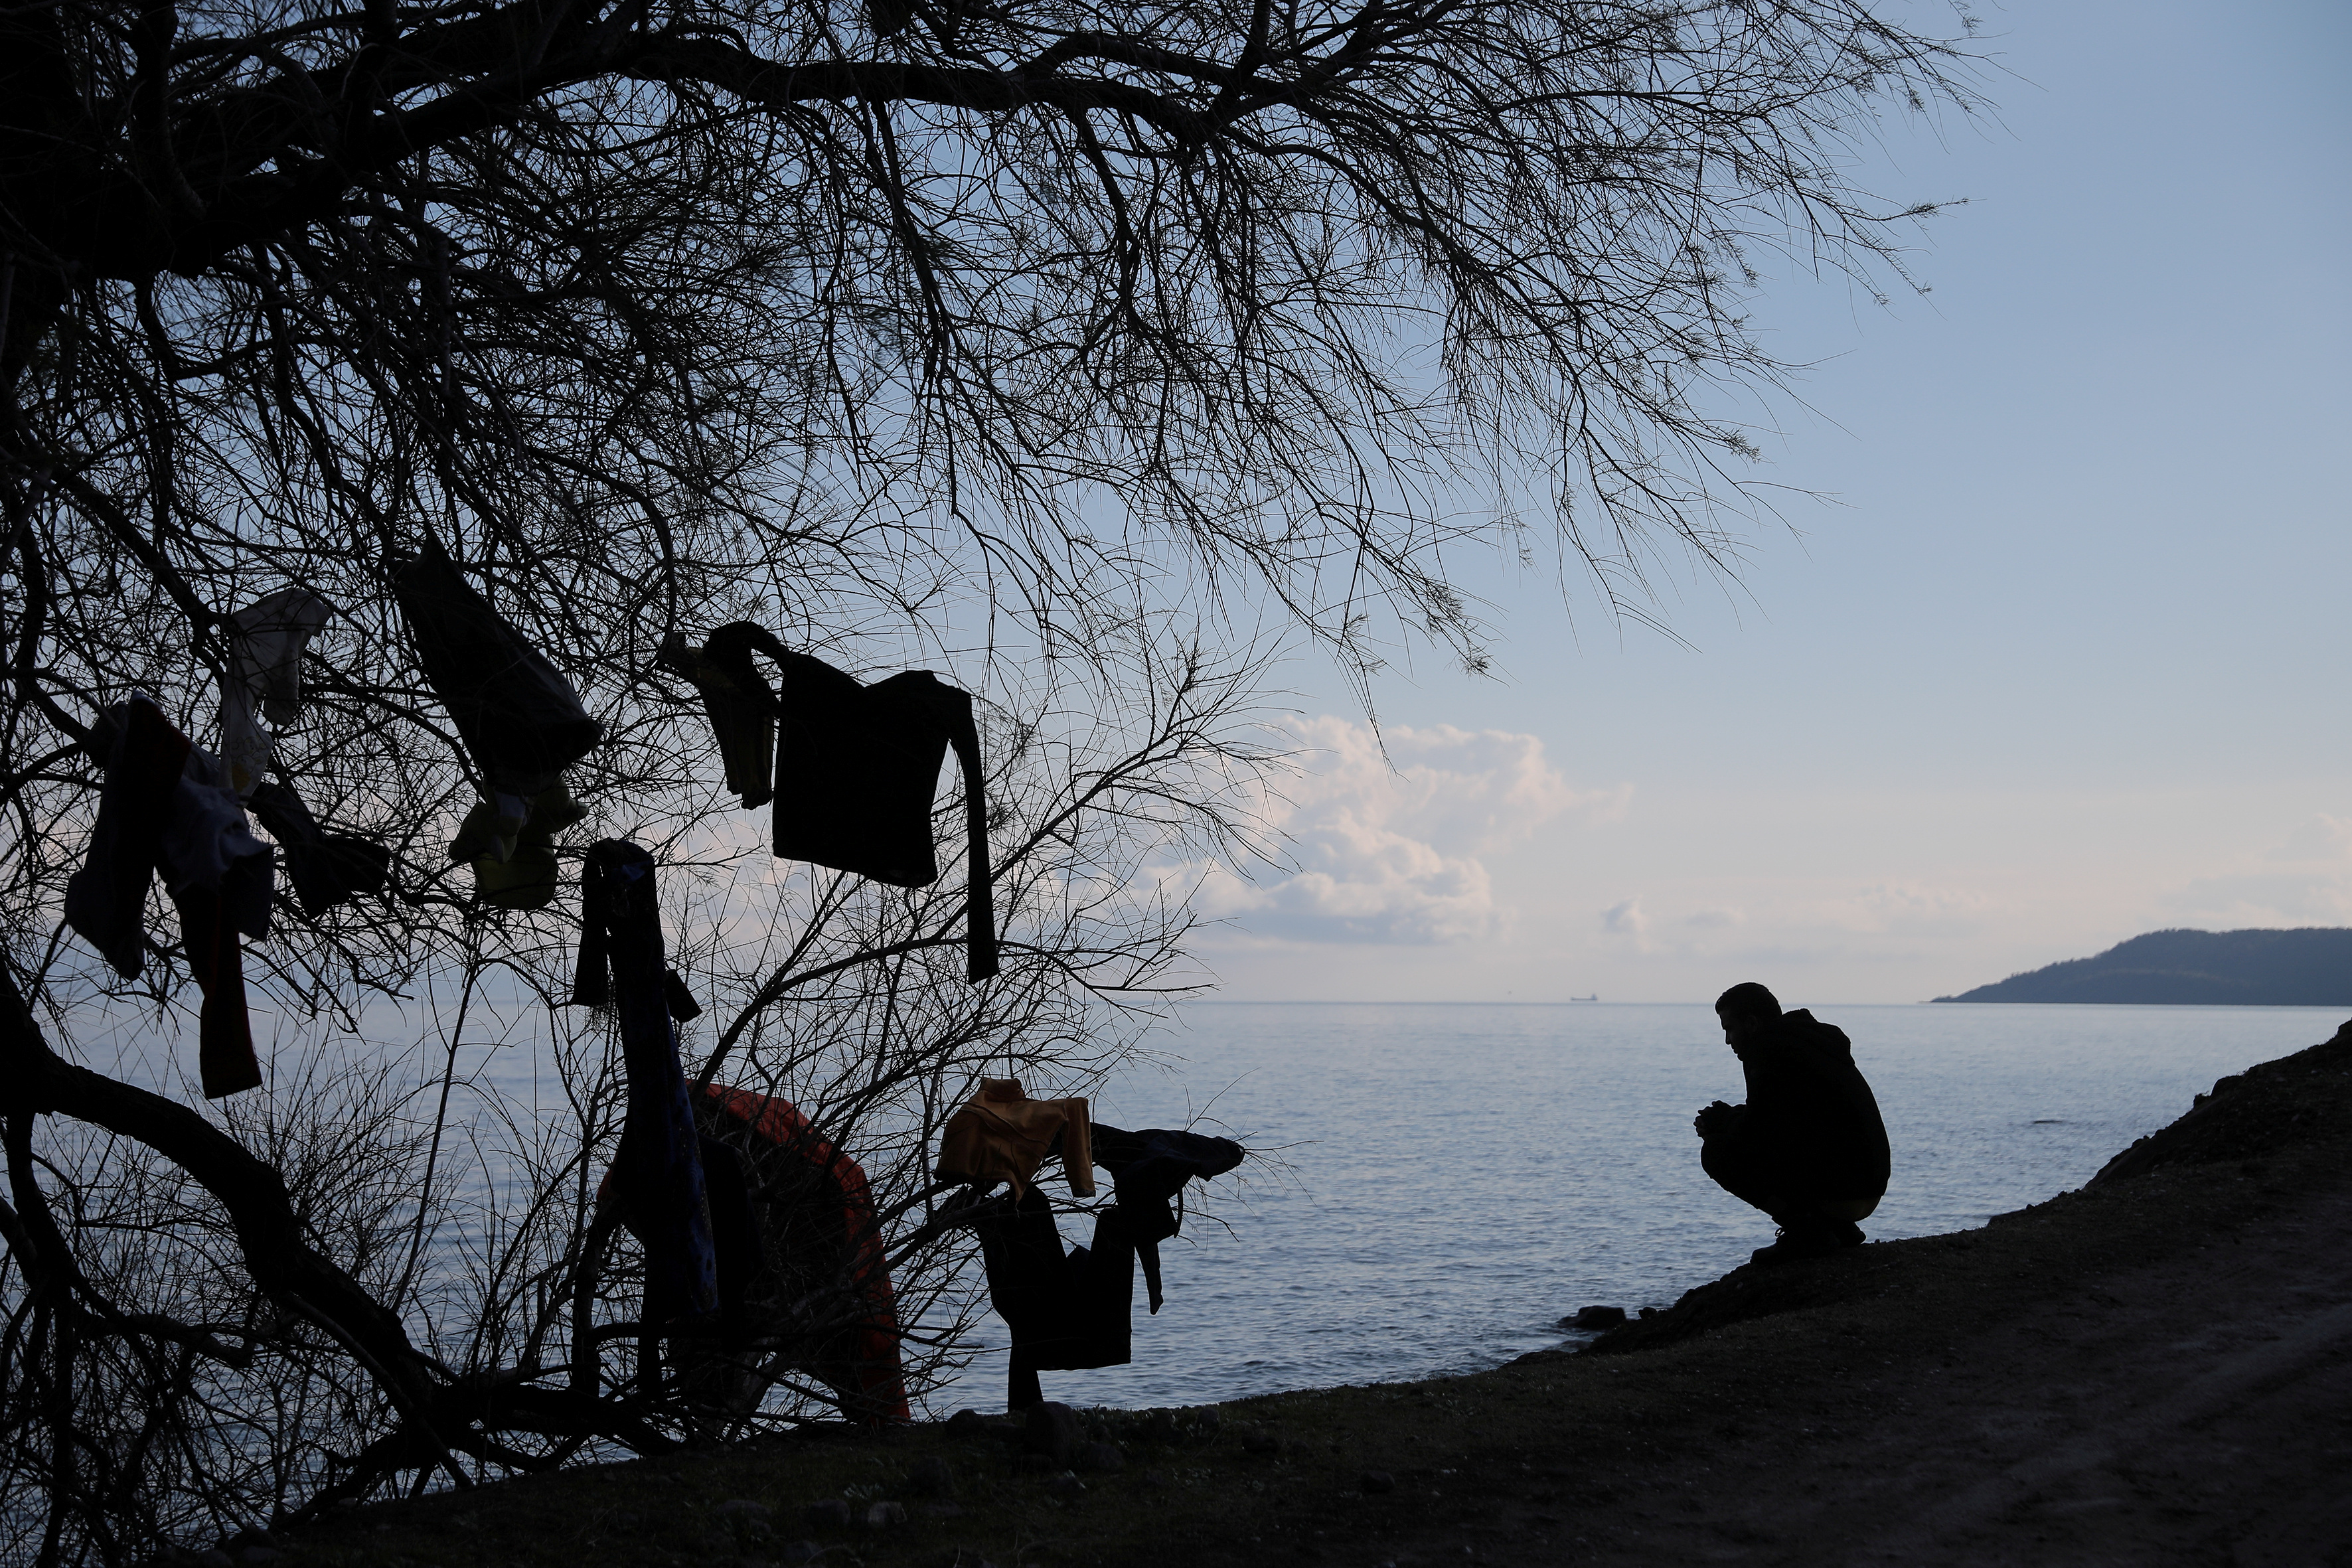 A migrant, who arrived the previous day on a dinghy after crossing part of the Aegean Sea from Turkey, sits next to a tree where clothes are left to dry, near the village of Skala Sikamias, on the island of Lesbos